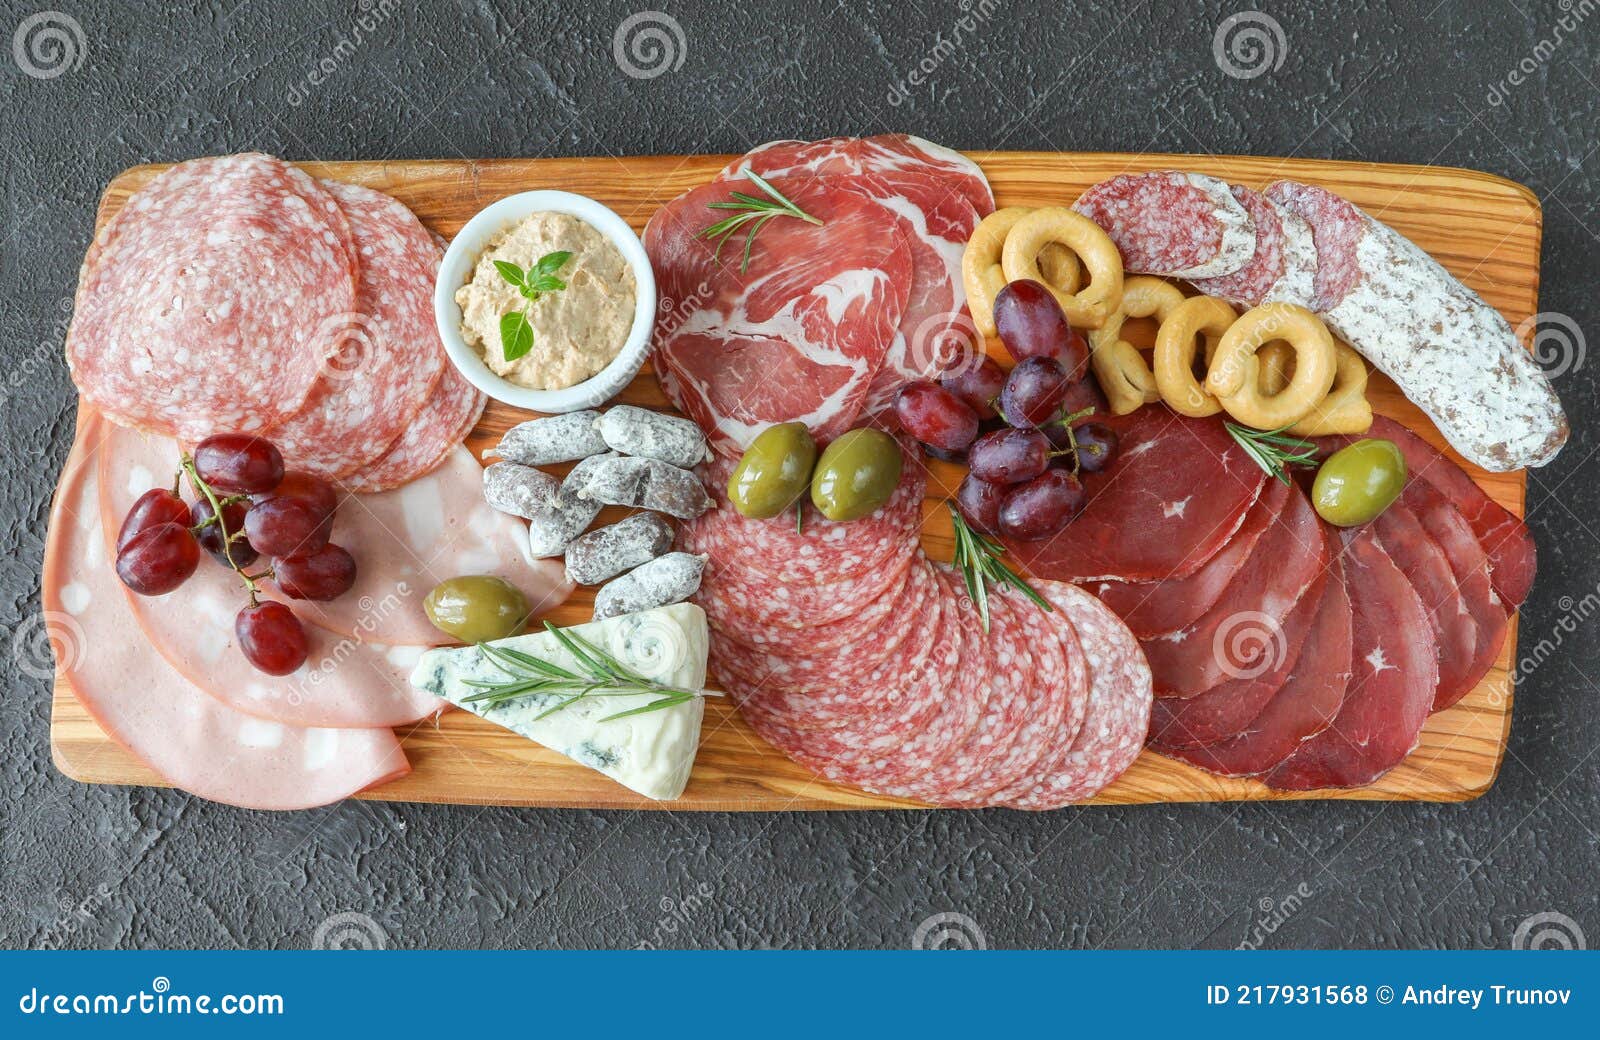 meat and cheese board with products from italy - prosciutto, mortadella, felino, bresaola, gorgonzola, parmesan, pate, green